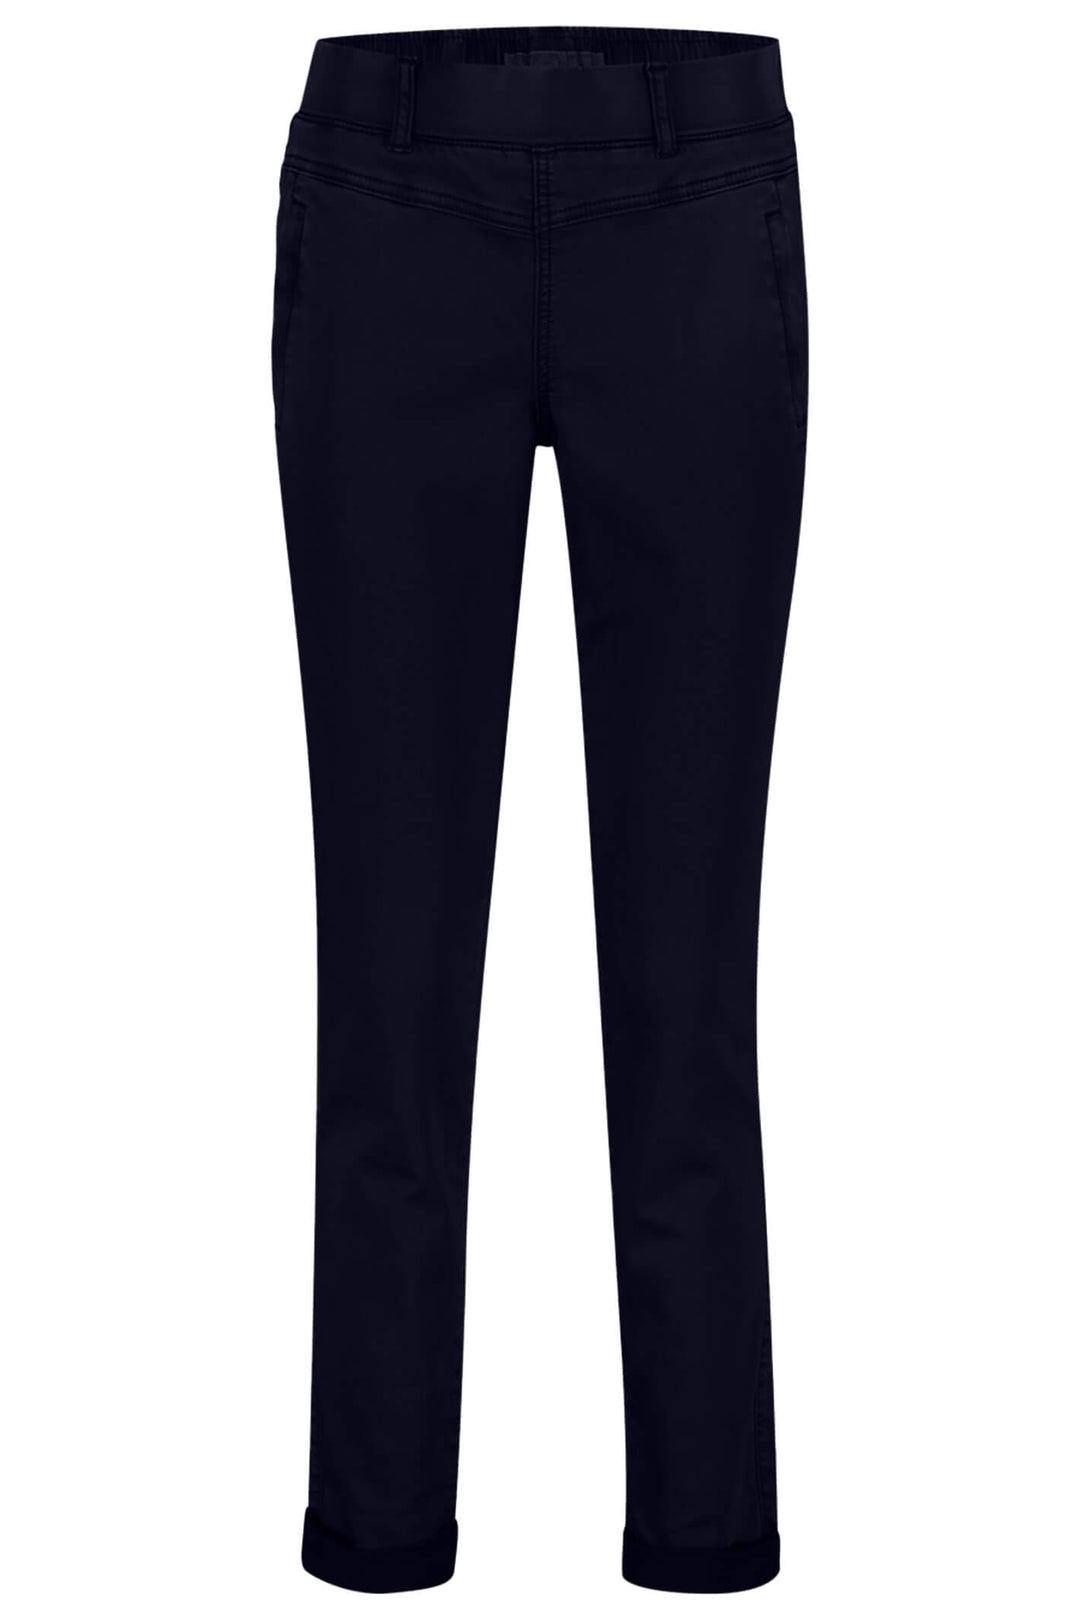 Red Button SRB4059 Tessy Jog No Cord Navy Pull-On Trousers - Dotique